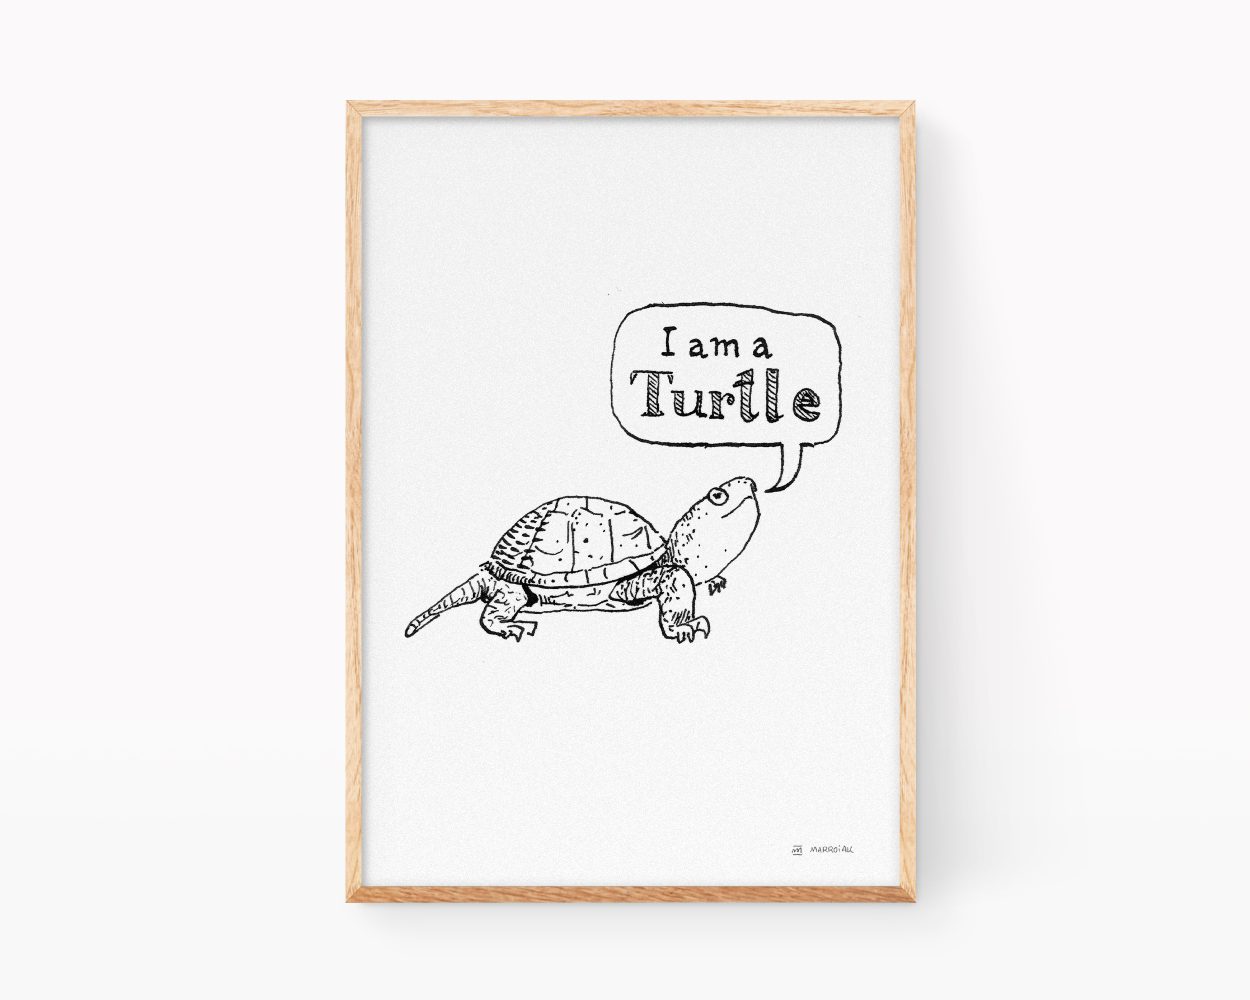 happy turtle fine art print illustration. Black and white drawing